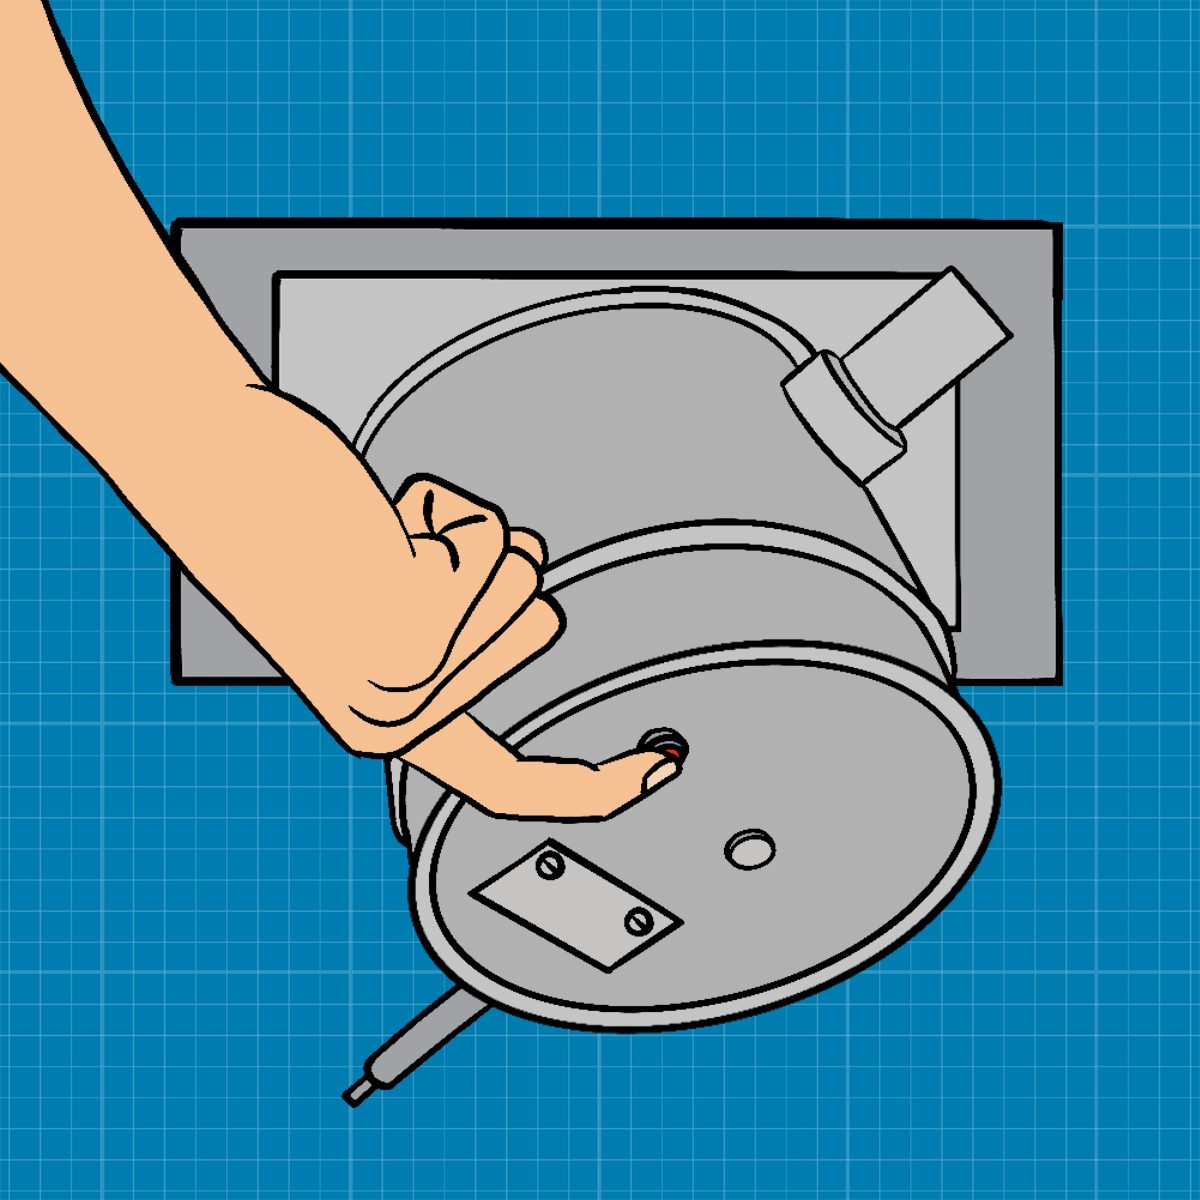 How To Use A Garbage Disposal Reset Button